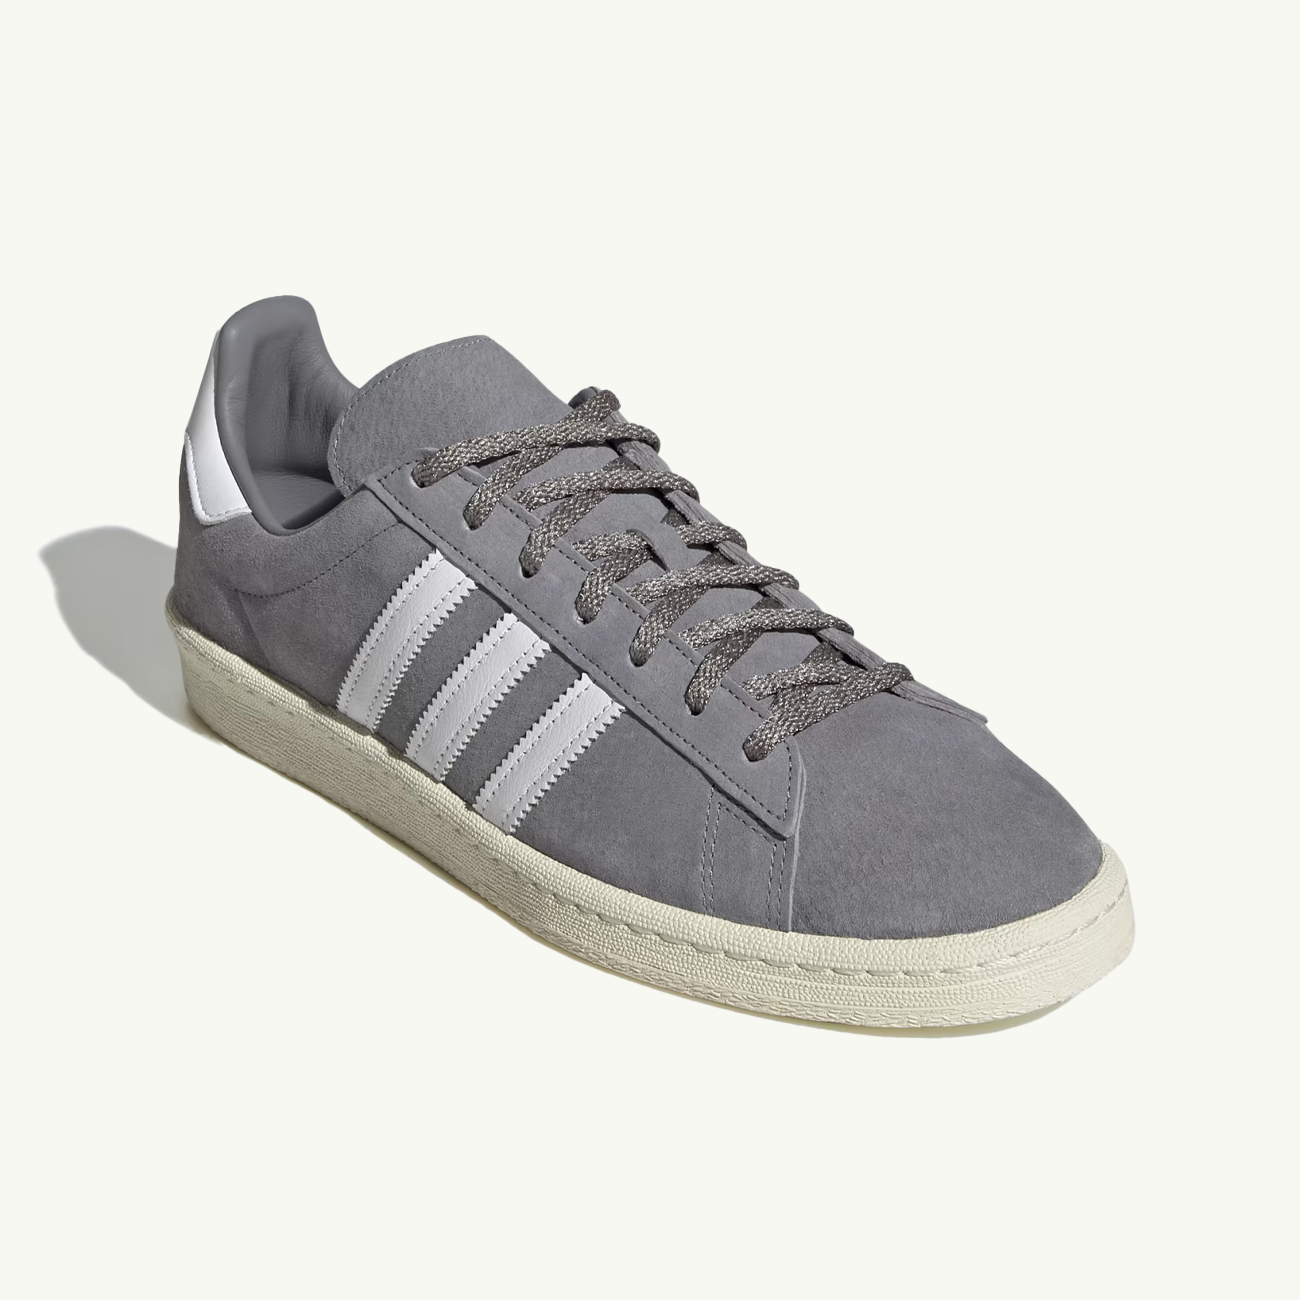 Campus 80s - Grey/Cloud White/Off White